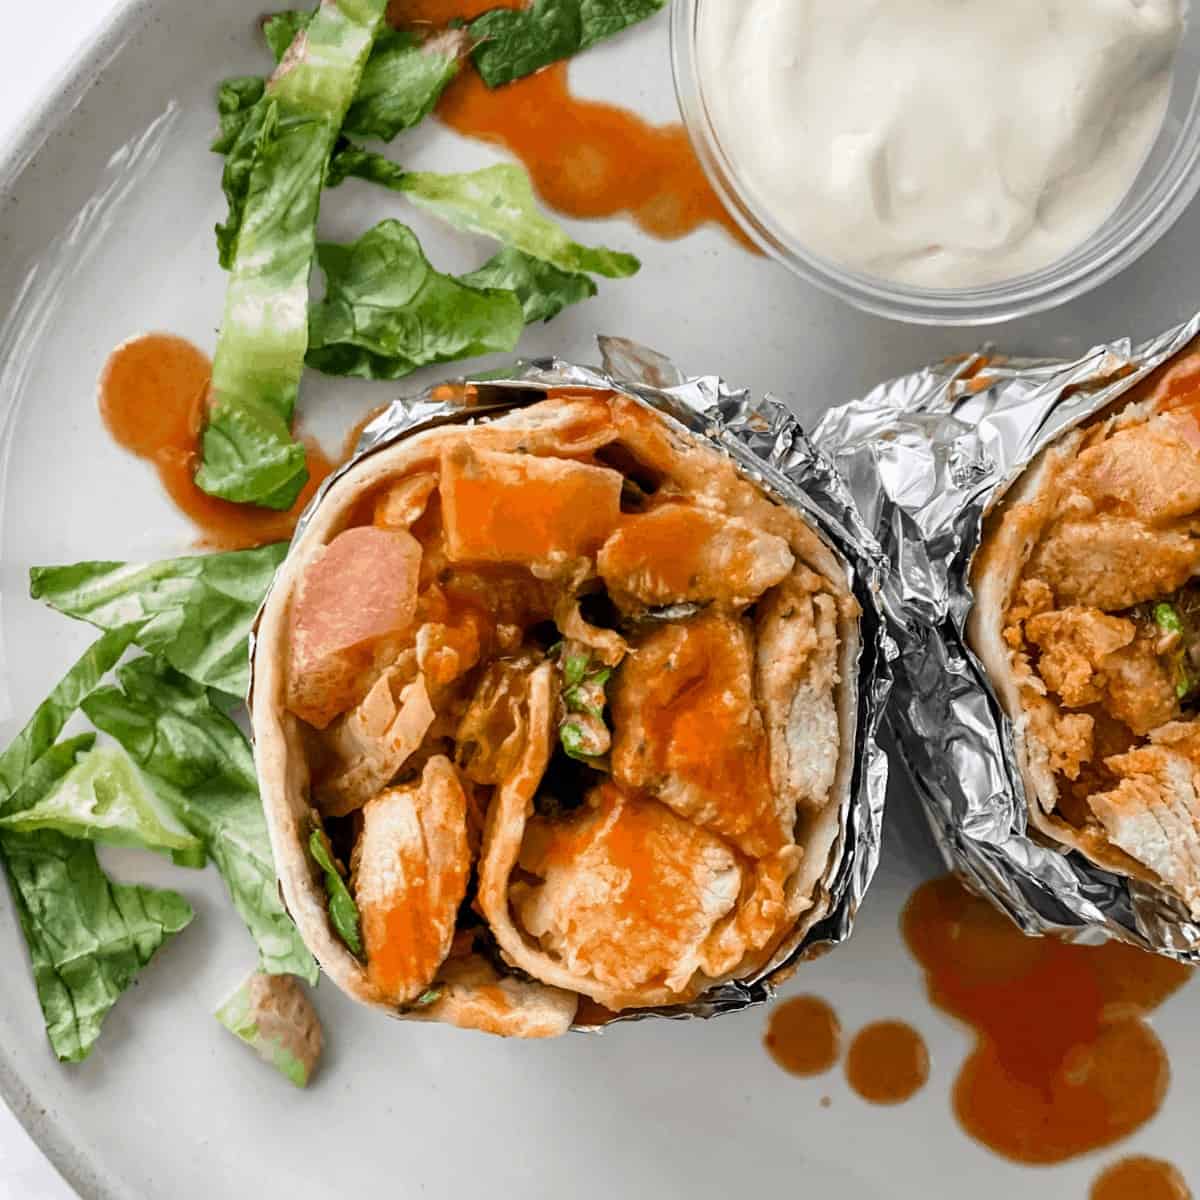 This quick and easy Buffalo Chicken Wrap includes spicy Buffalo chicken tenders, crunchy veggies, and creamy blue cheese yogurt dressing! It comes together in less than 30 minutes, making it perfect for a healthy weeknight meal